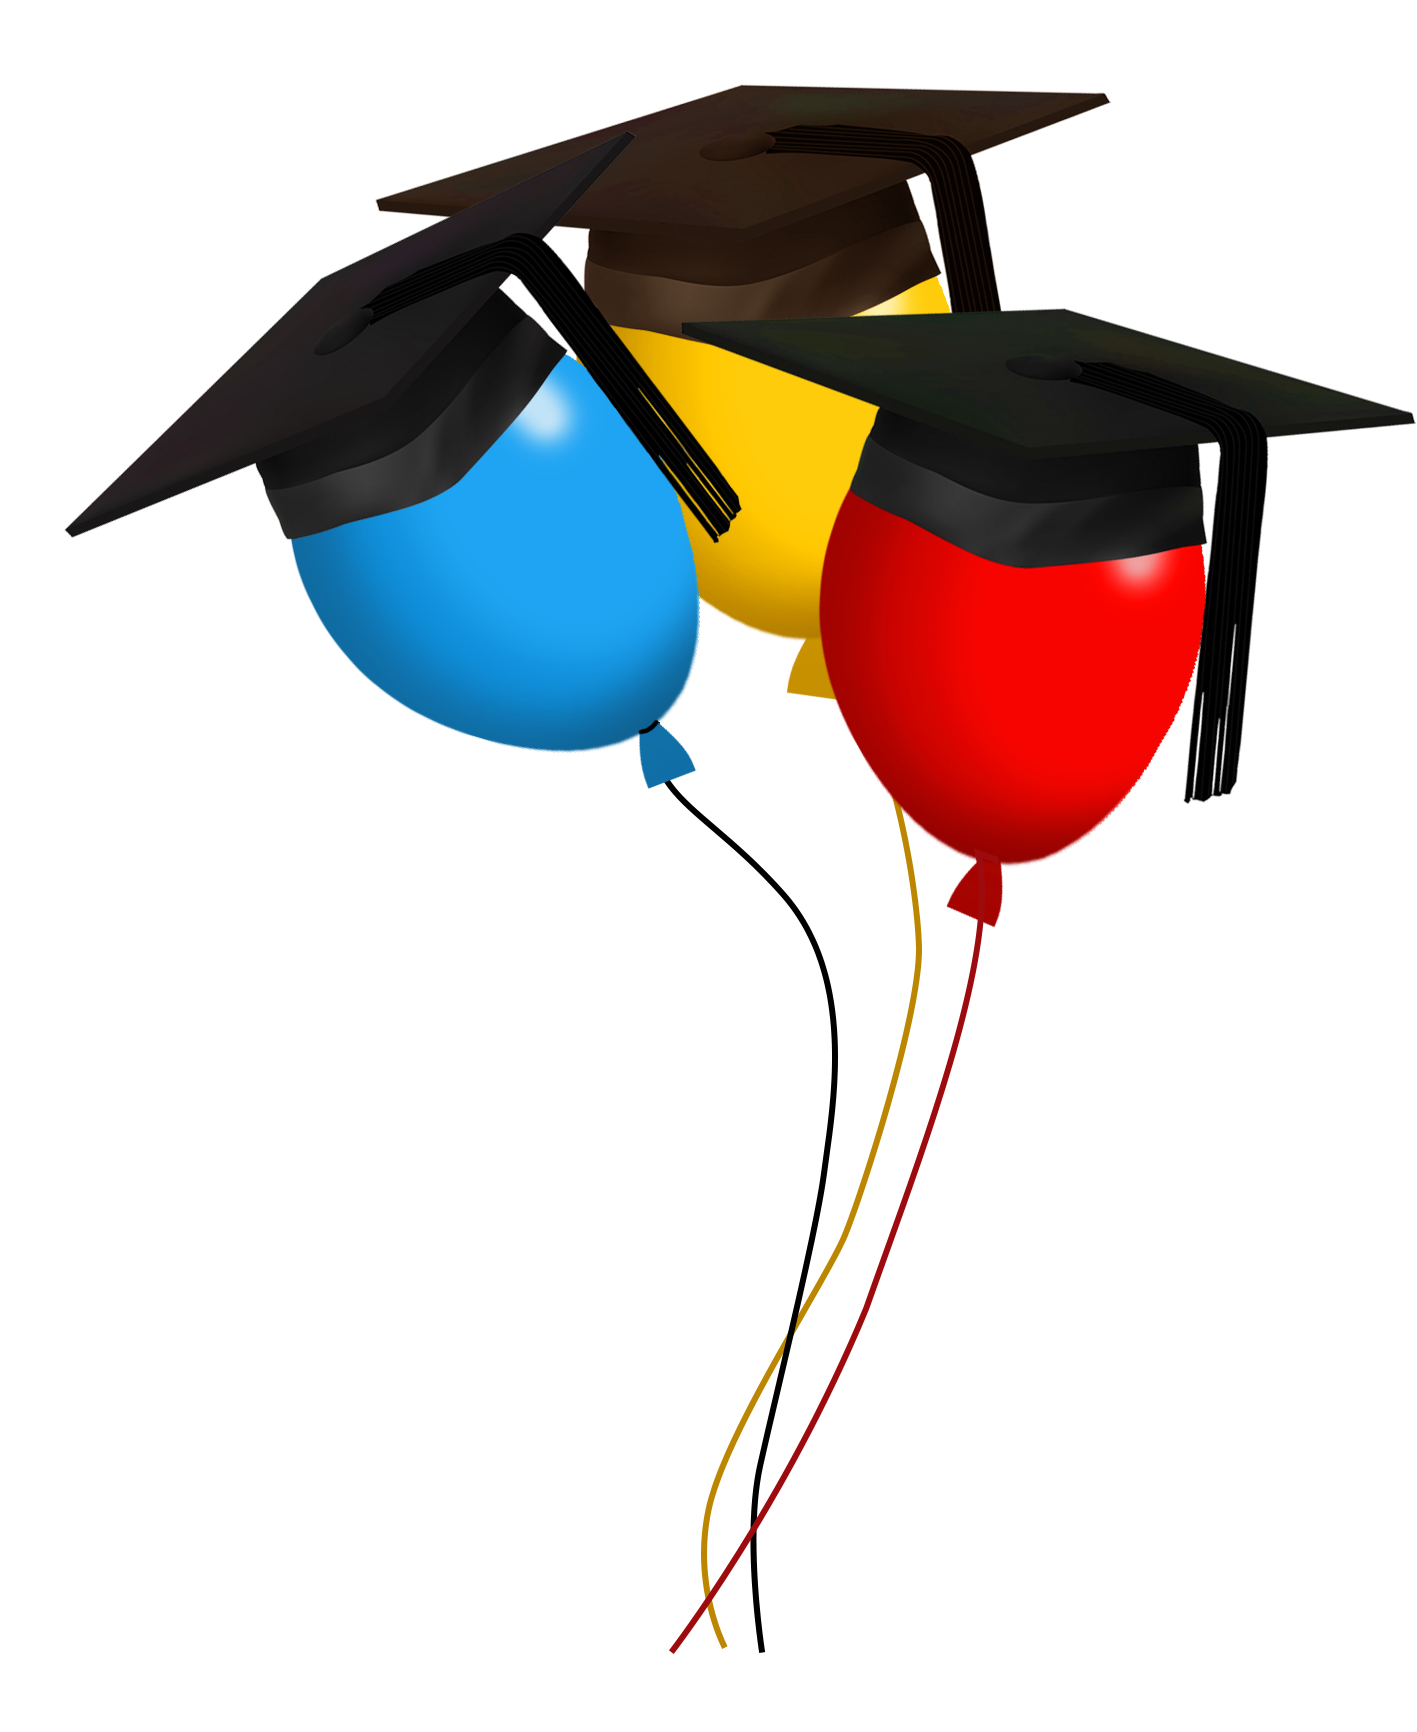 graduation day balloons red-blue-yellow